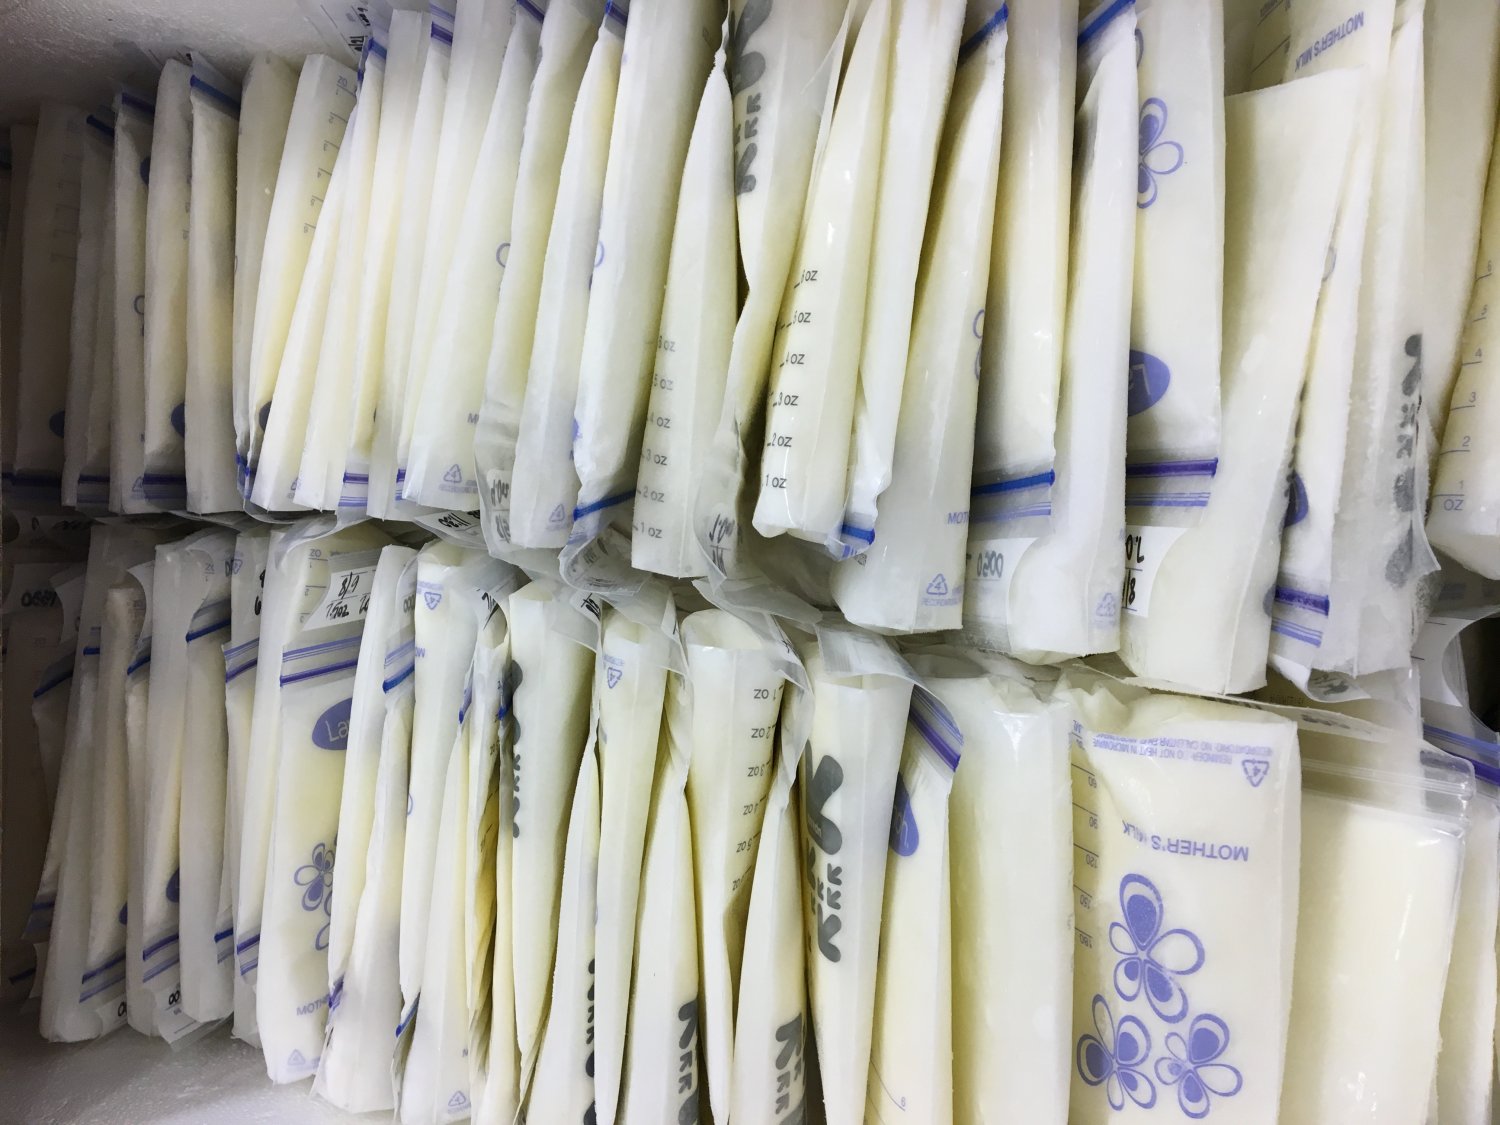 Frozen bags of breastmilk lined up in a shipping container